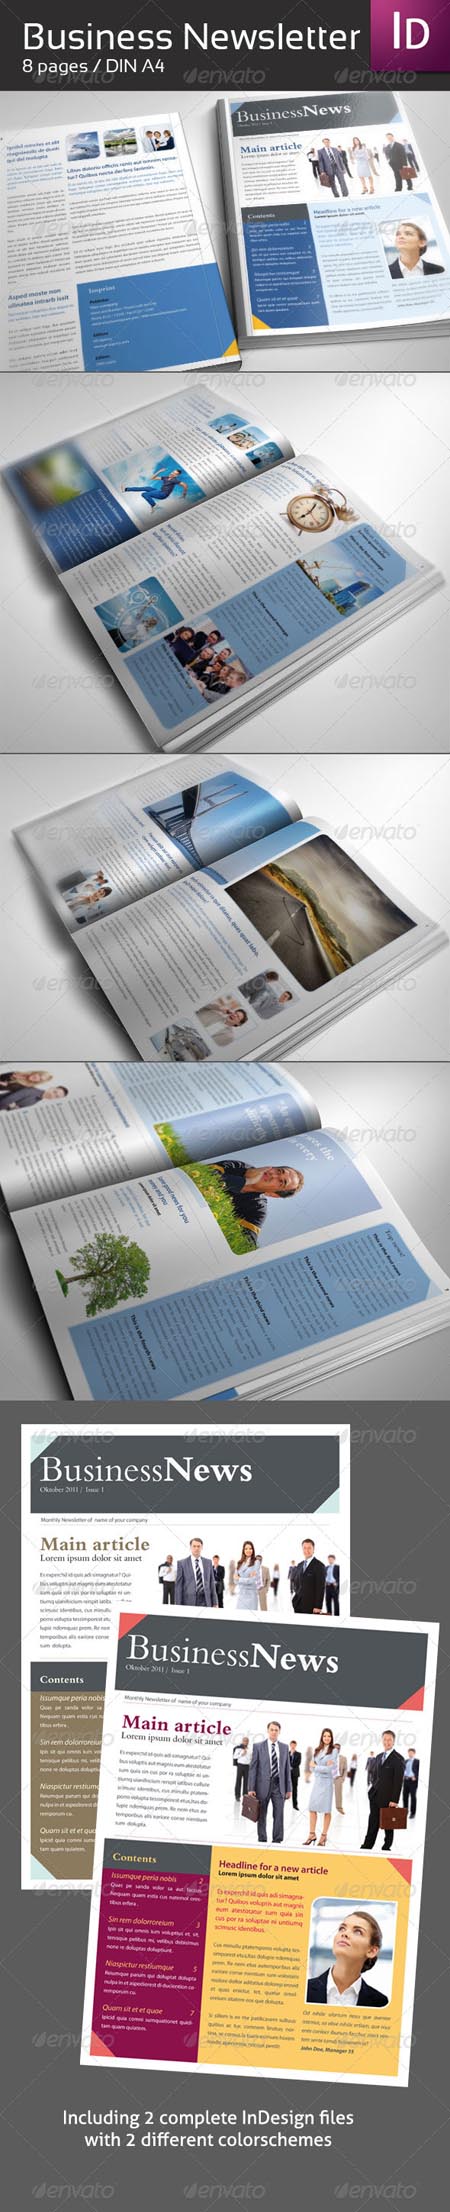 GraphicRiver Business Newsletter DIN A4